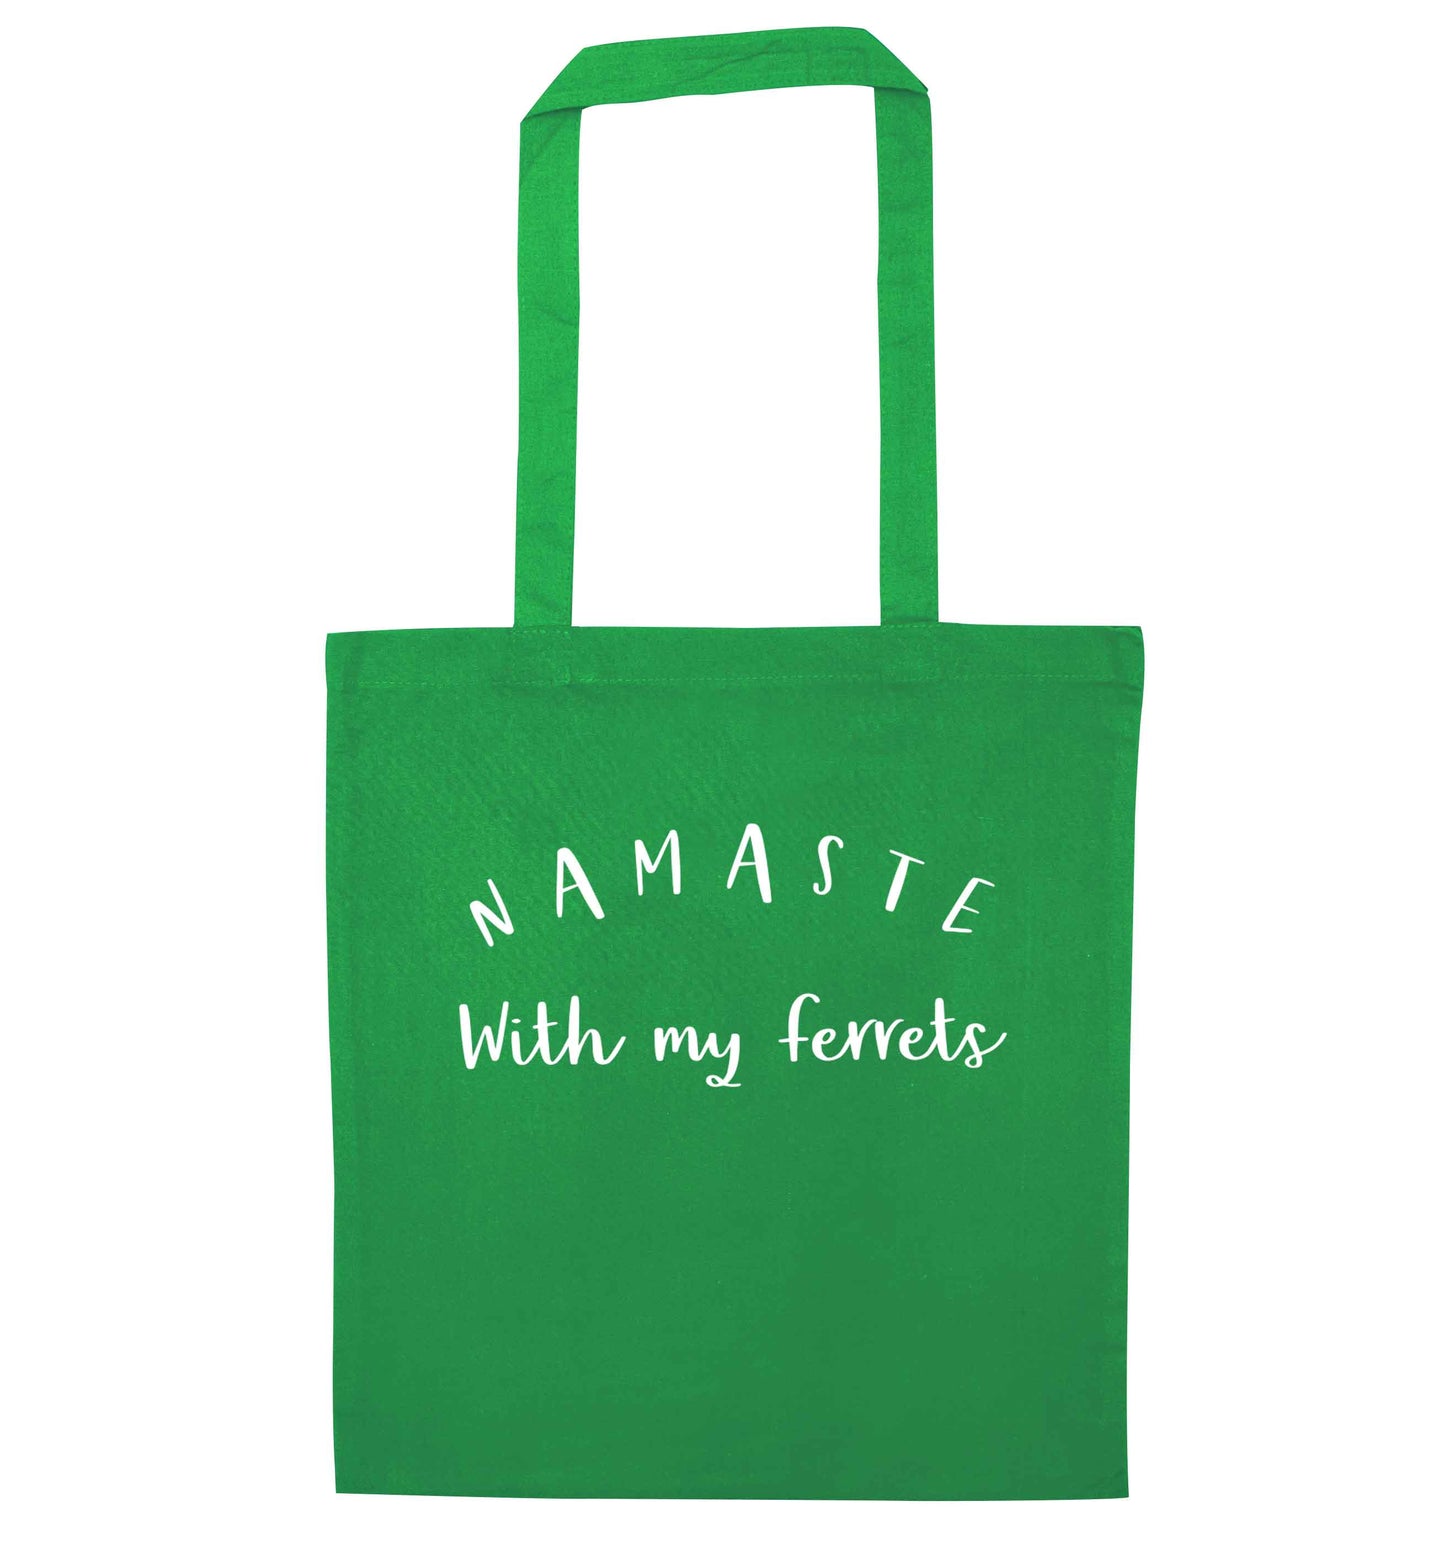 Namaste with my ferrets green tote bag